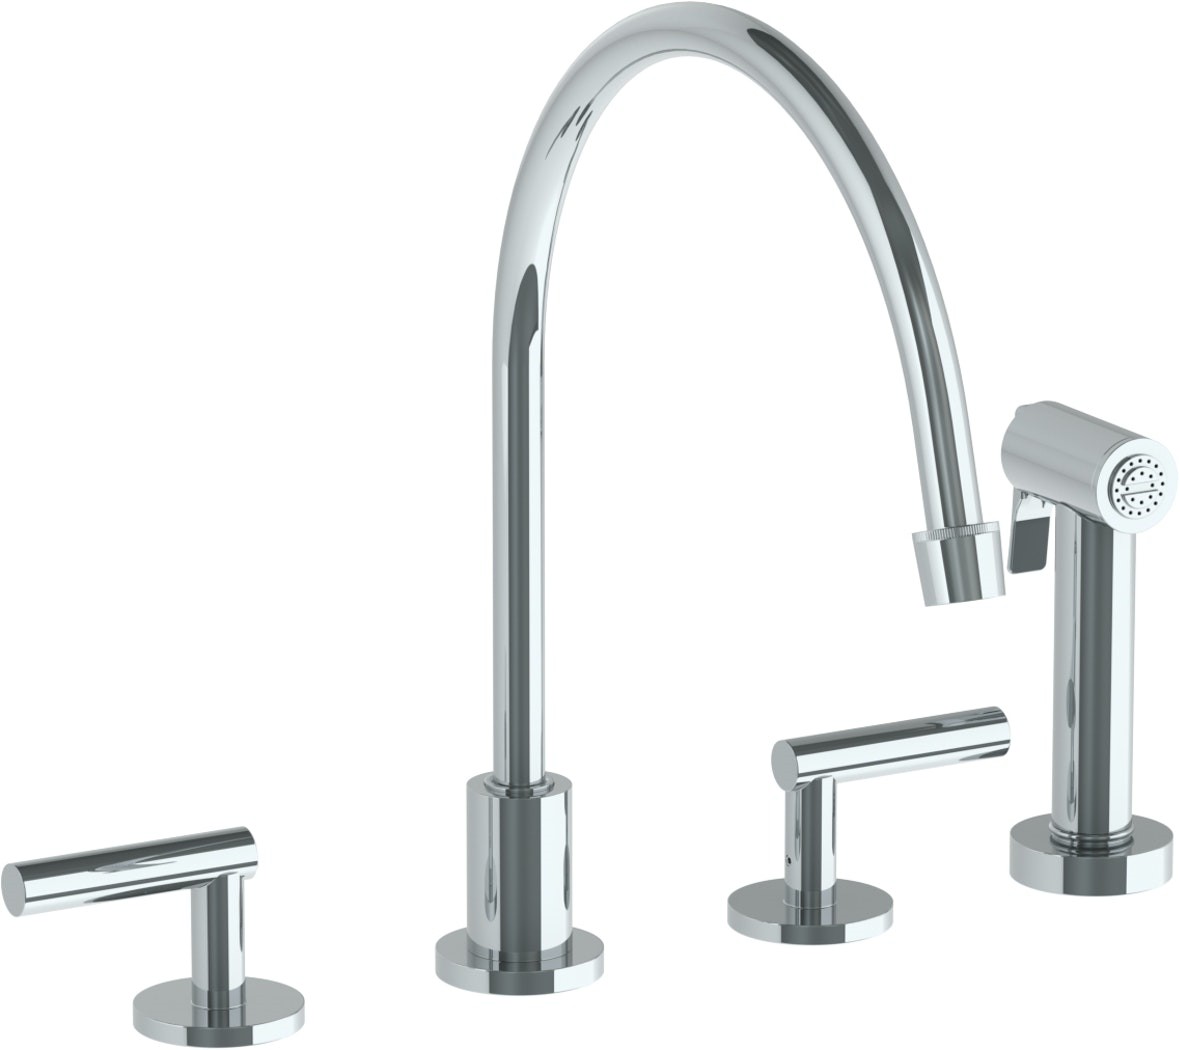 WATERMARK 23-7.1EG LOFT 12 1/2 INCH FOUR HOLES DECK MOUNT EXTENDED GOOSENECK KITCHEN FAUCET WITH SIDE SPRAY